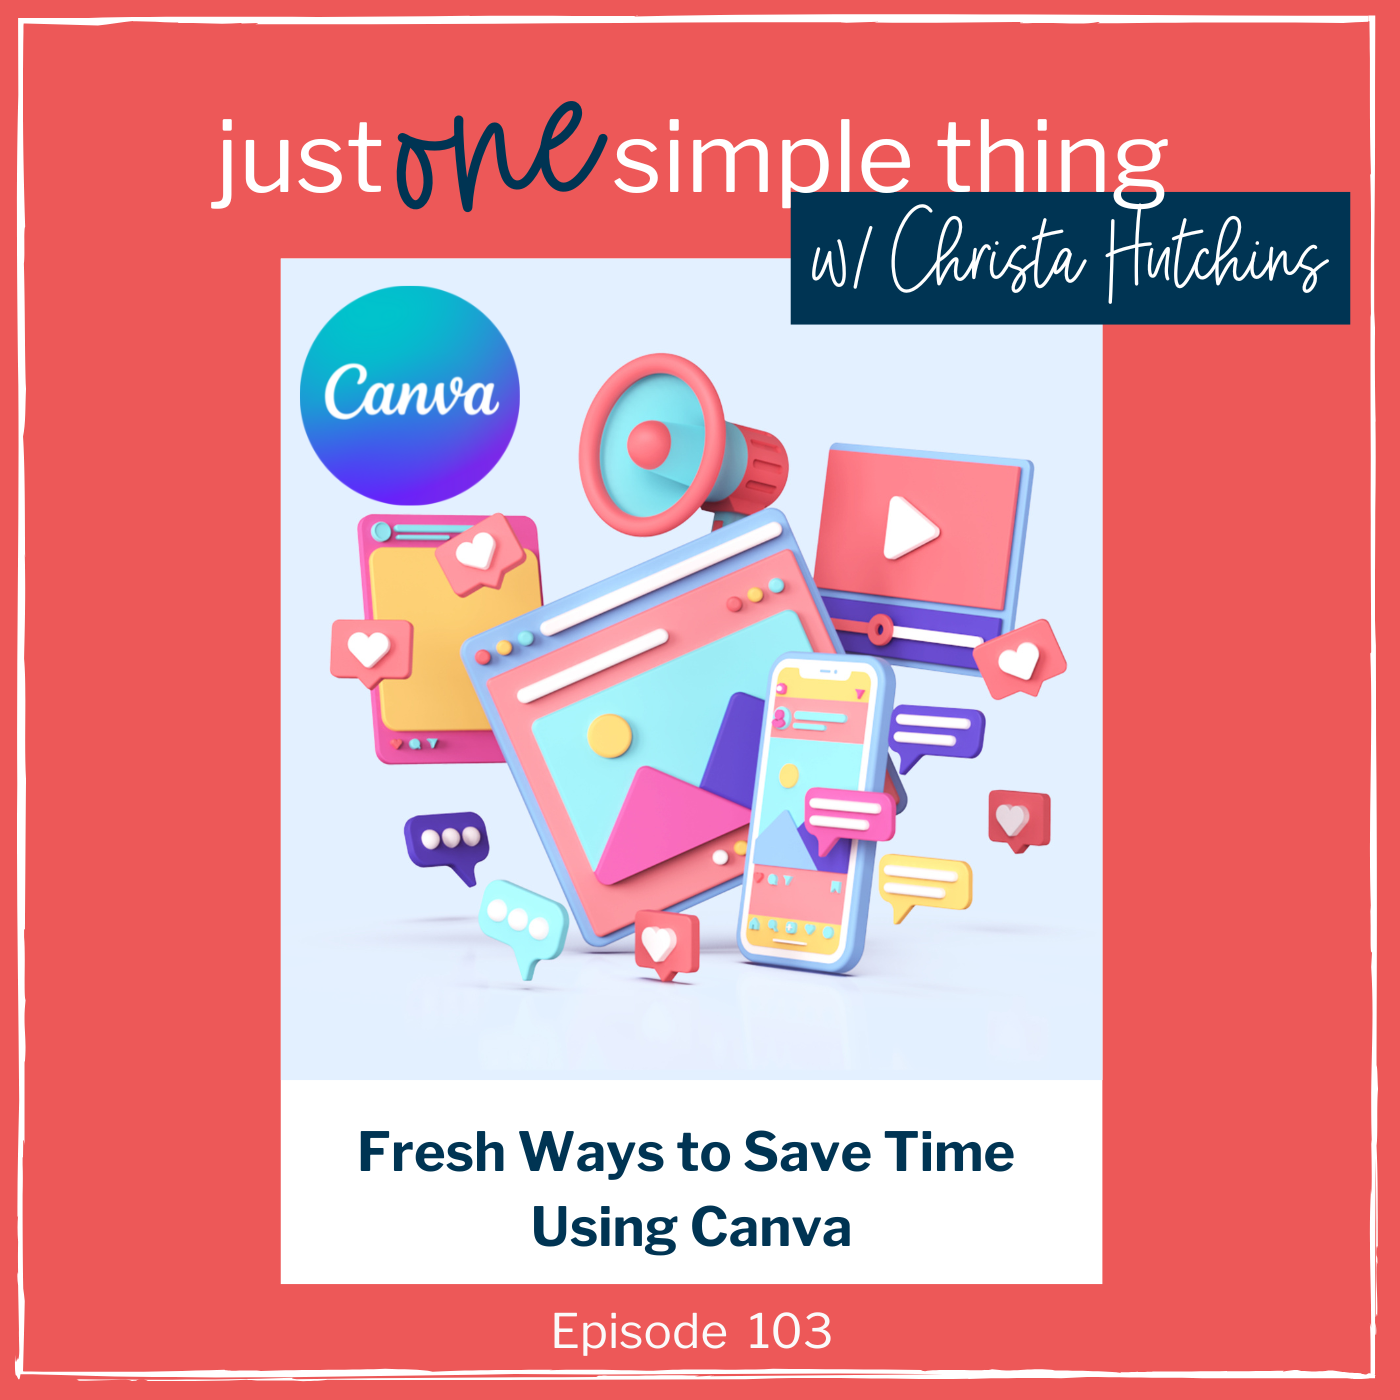 Fresh Ways to Save Time Using Canva